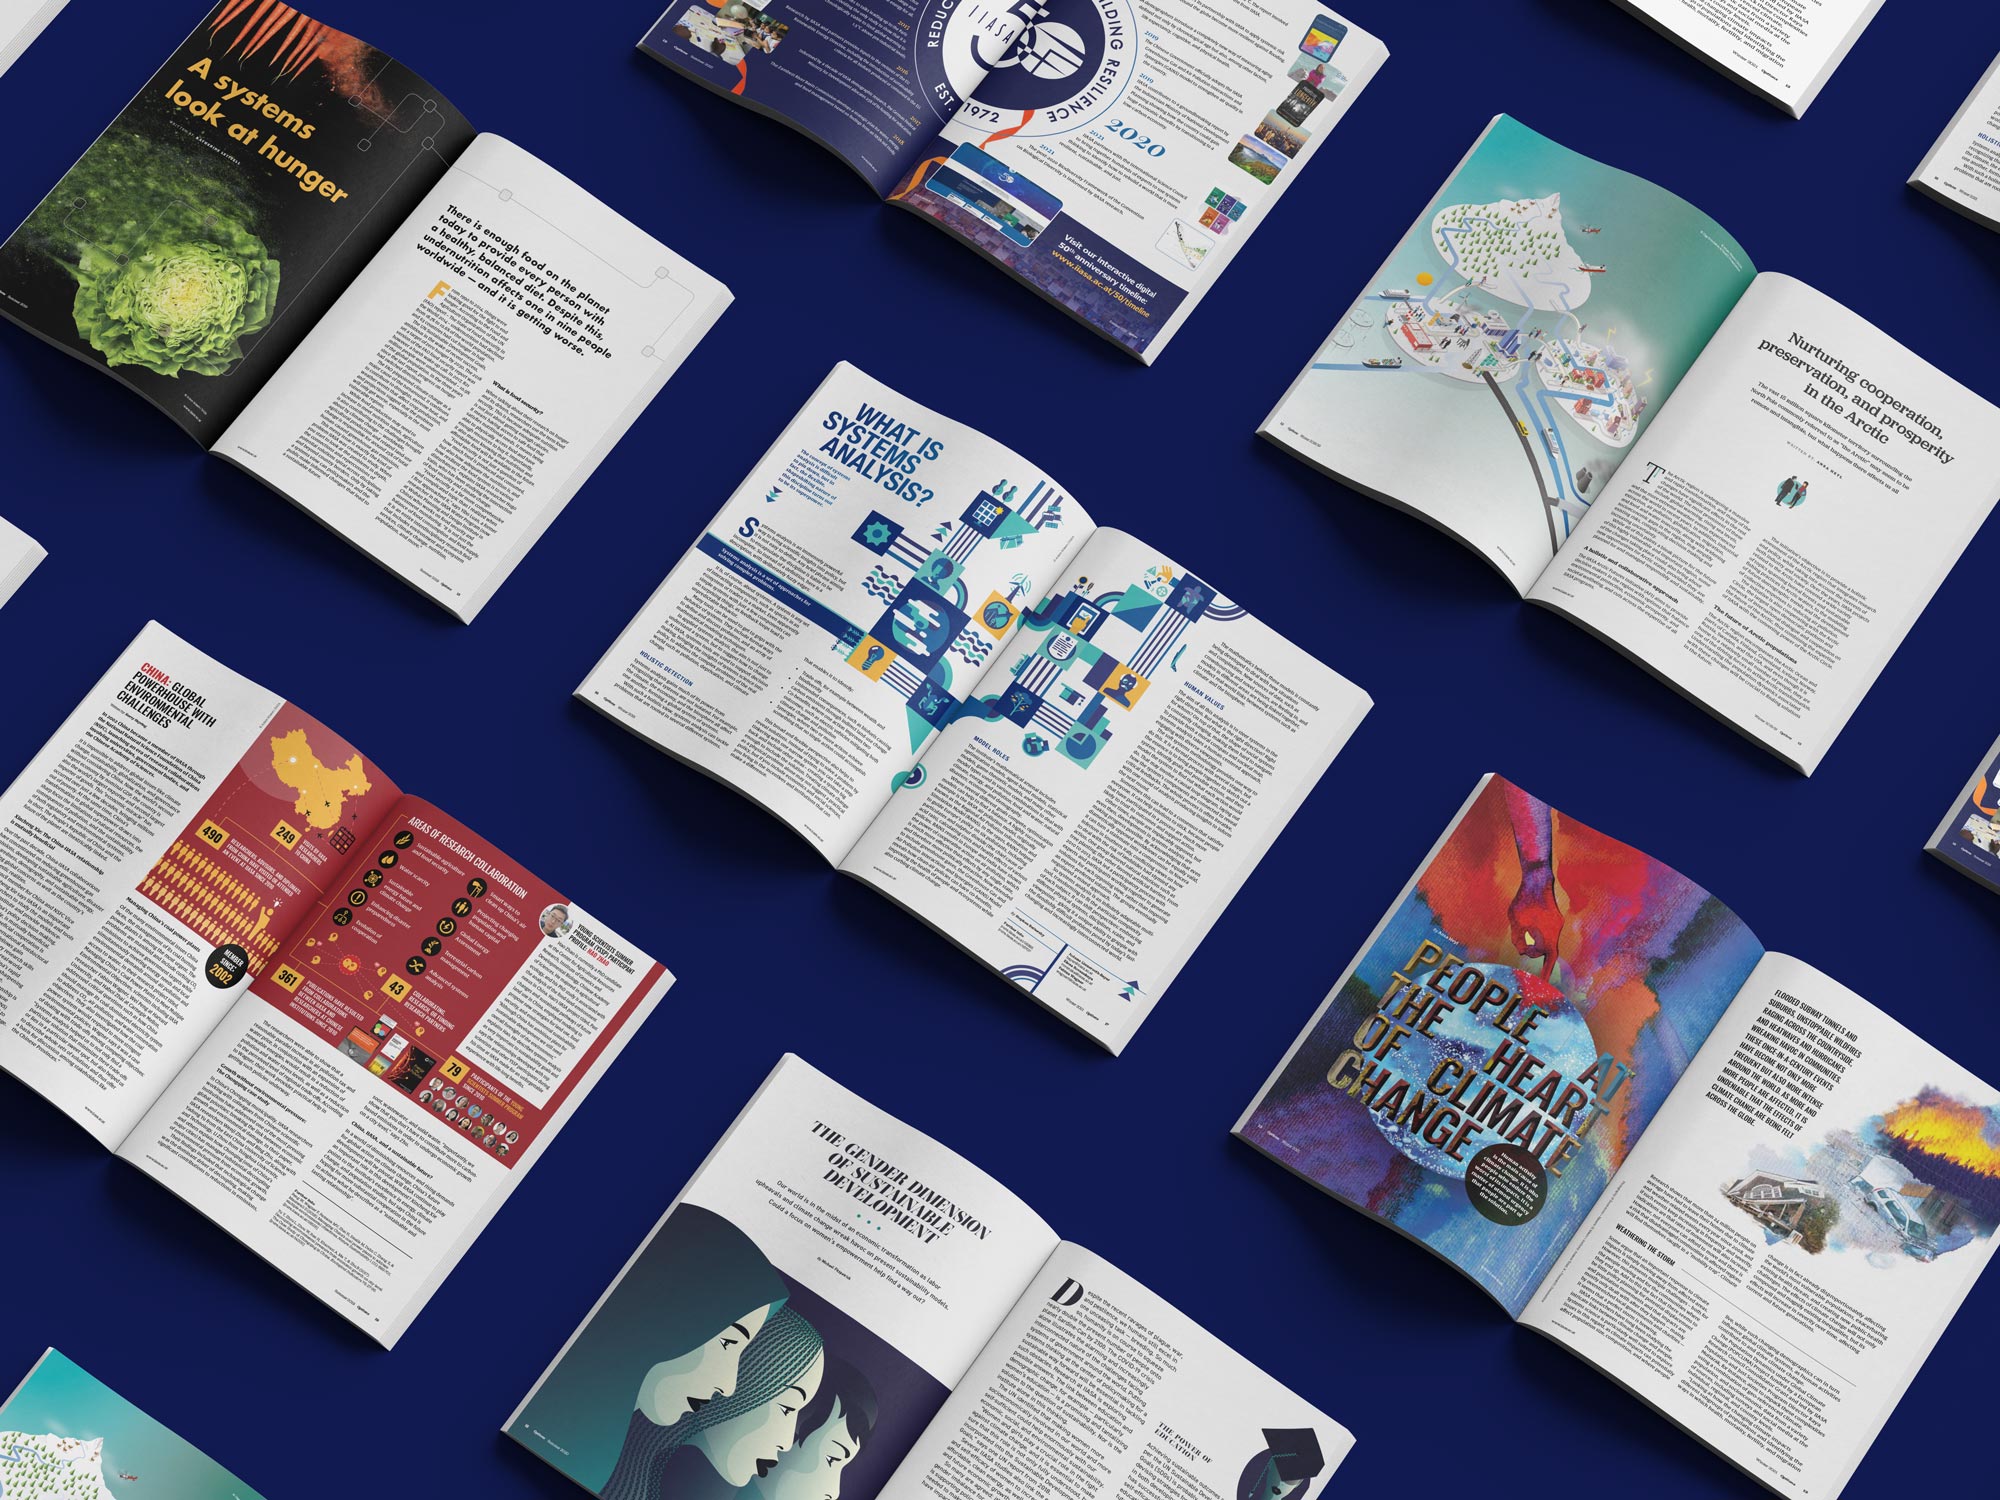 Magazine spreads laid out